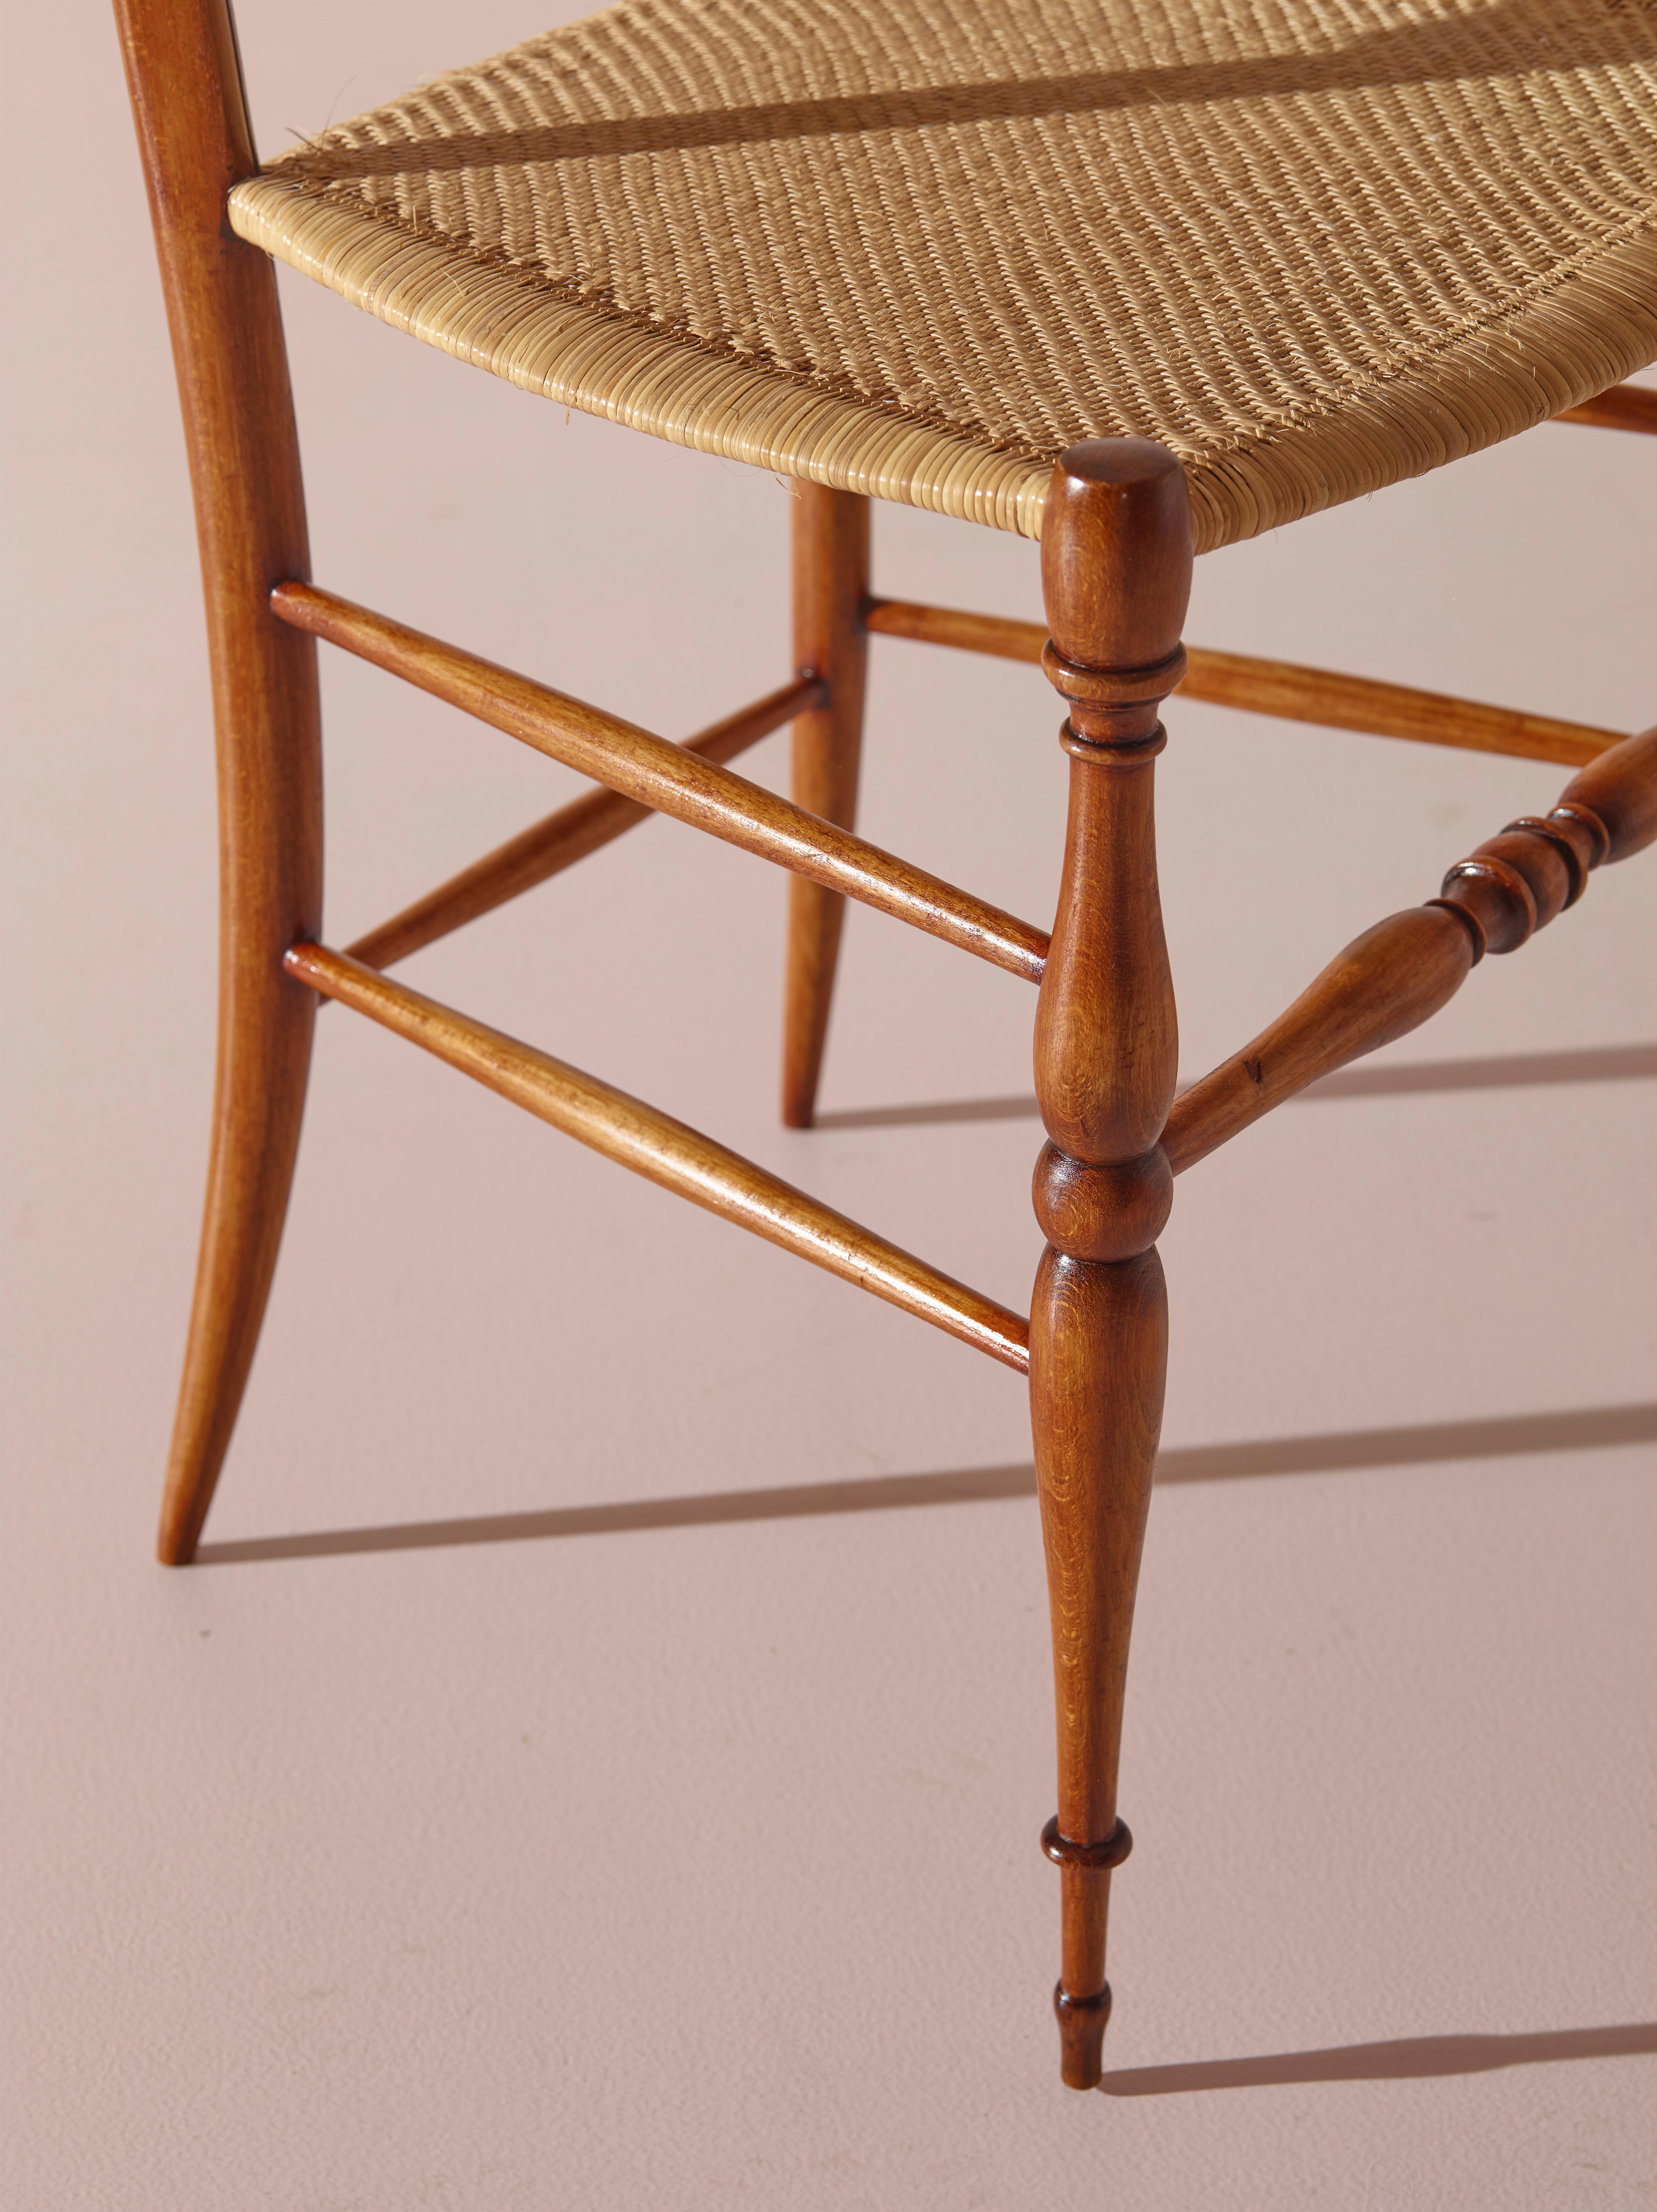 Hand-Knotted Pair of Cane and Beech ''Spade'' High Back Chairs Made in Chiavari, Italy 1960s